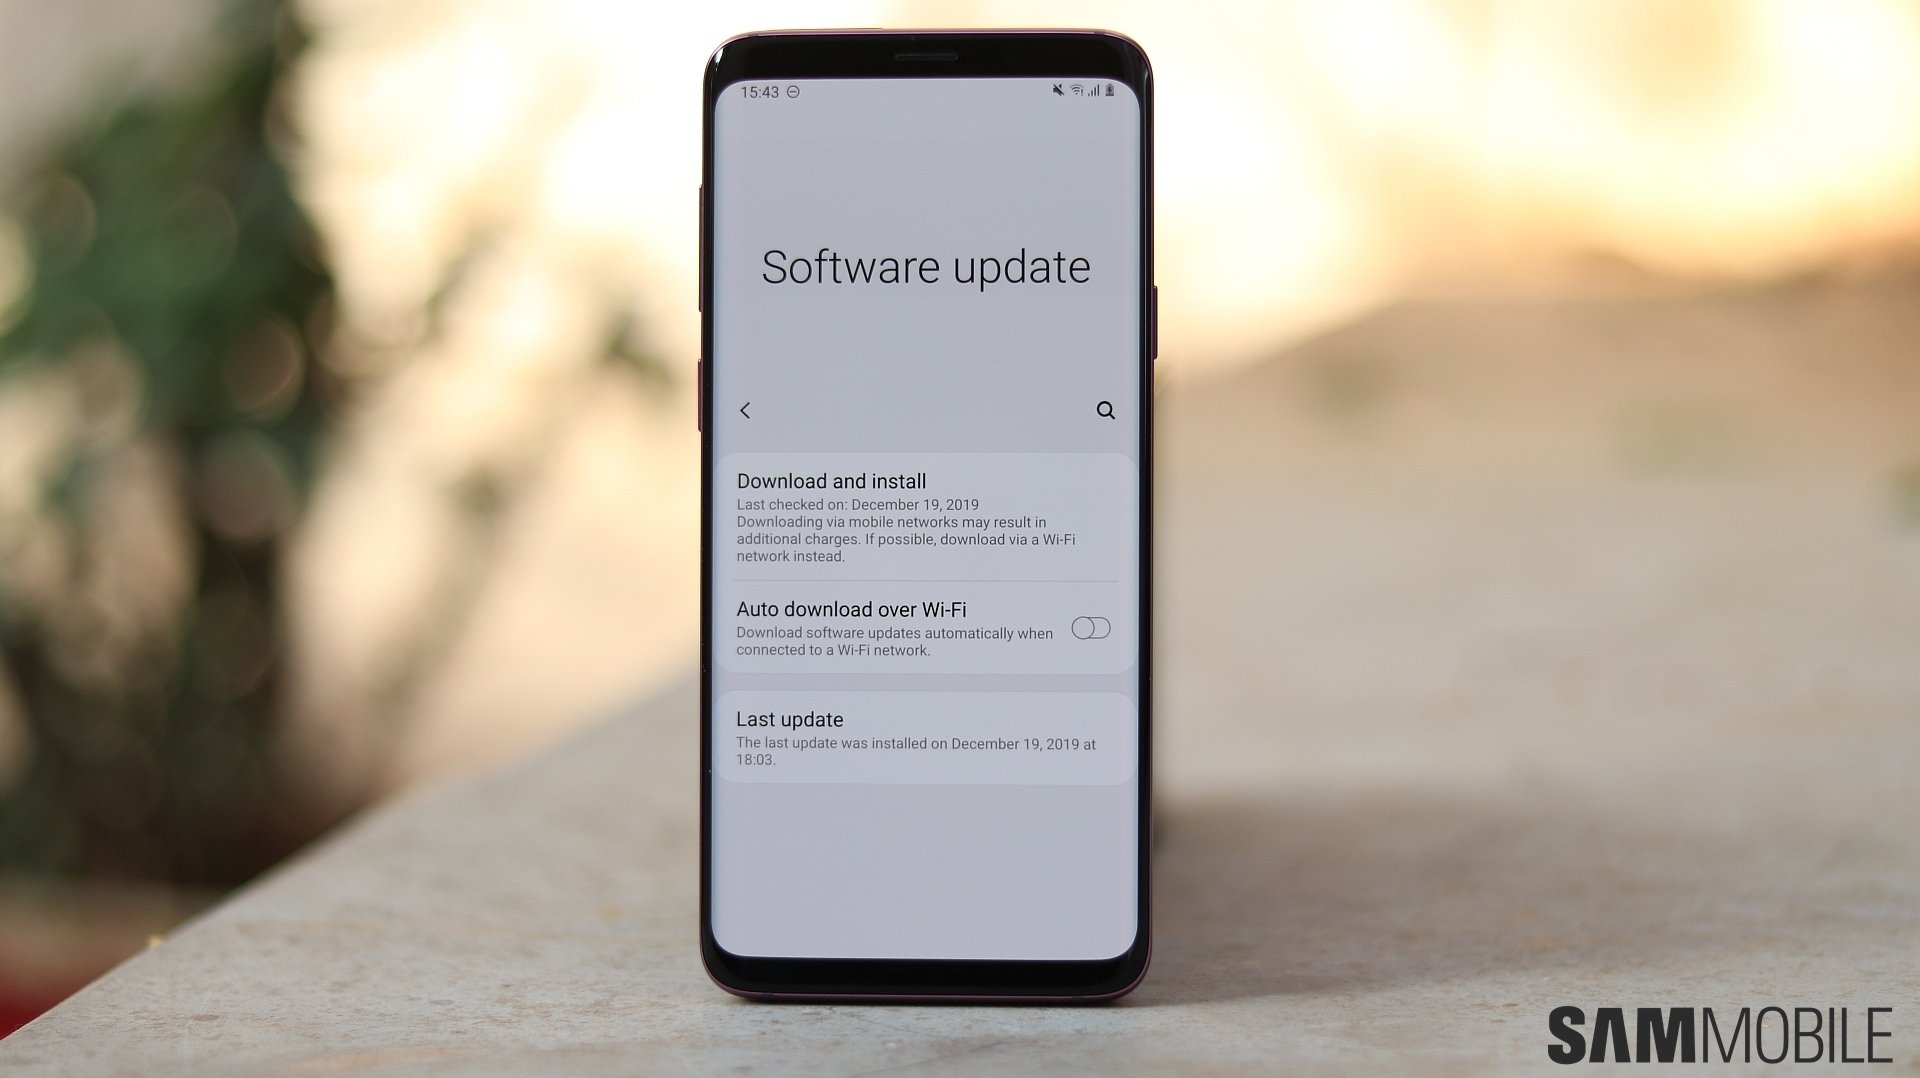 Will the Galaxy S9 or S9+ get Android 12 and One UI 4? SamMobile